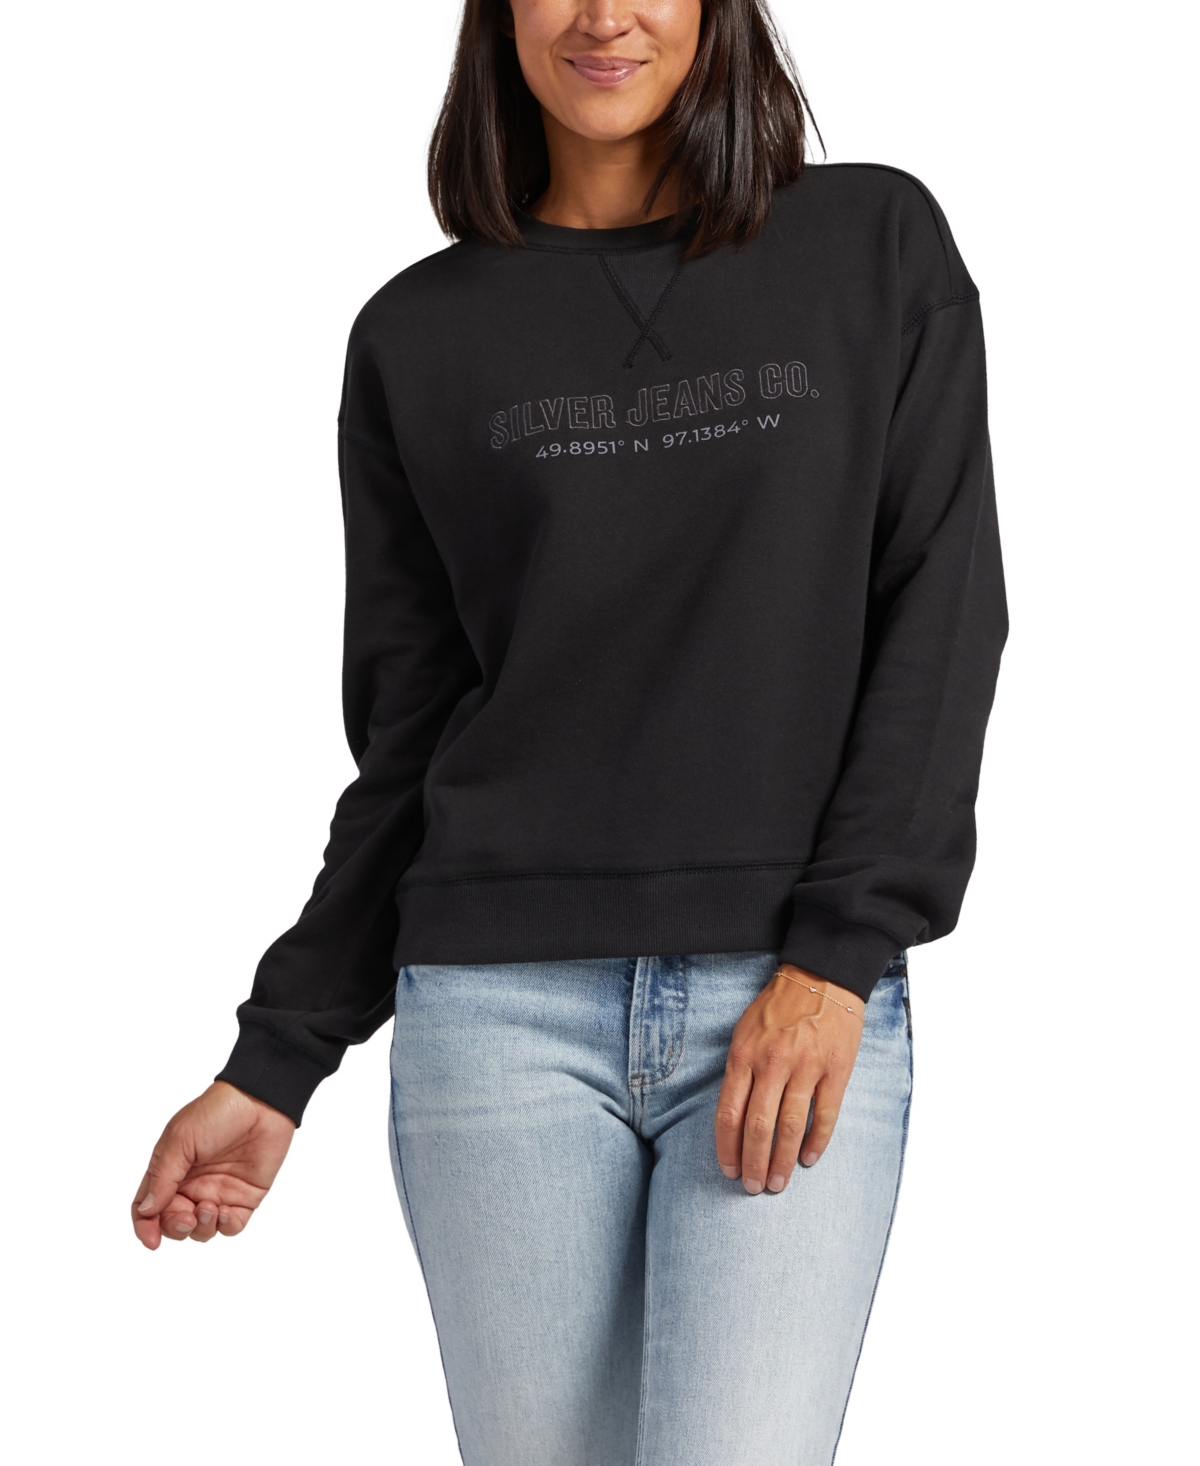 Silver Jeans Co. Women's Cotton Crewneck Embroidered Sweatshirt In Black